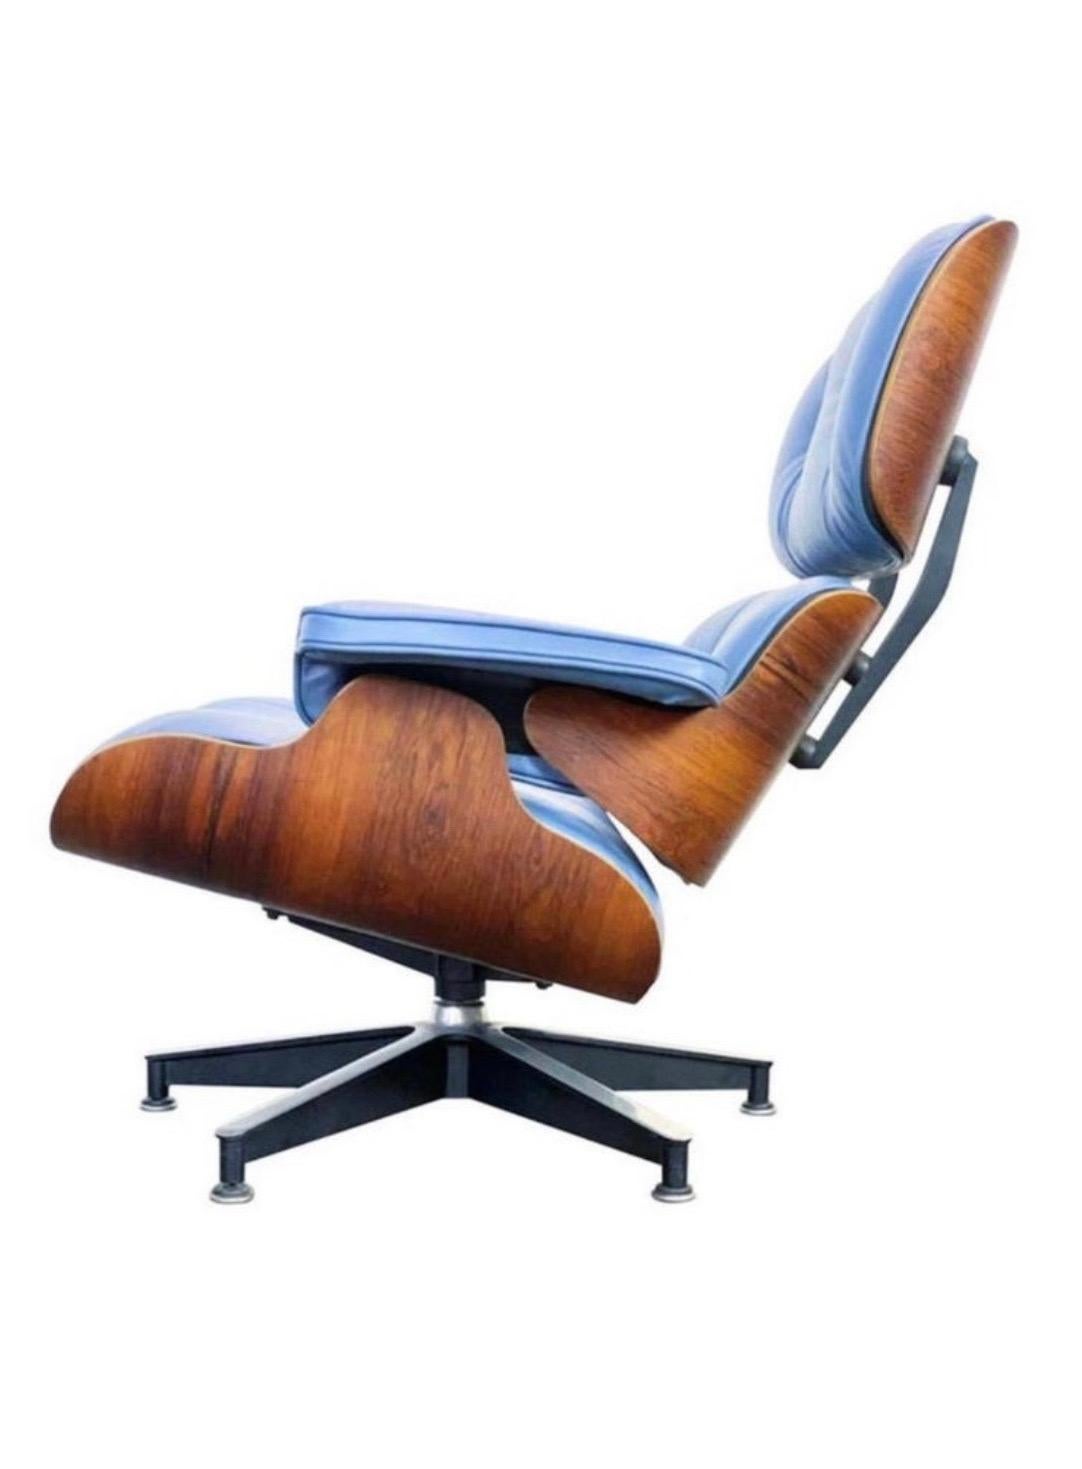 Restored Herman Miller Eames Lounge Chair with Custom Blue Leather In Good Condition For Sale In Brooklyn, NY